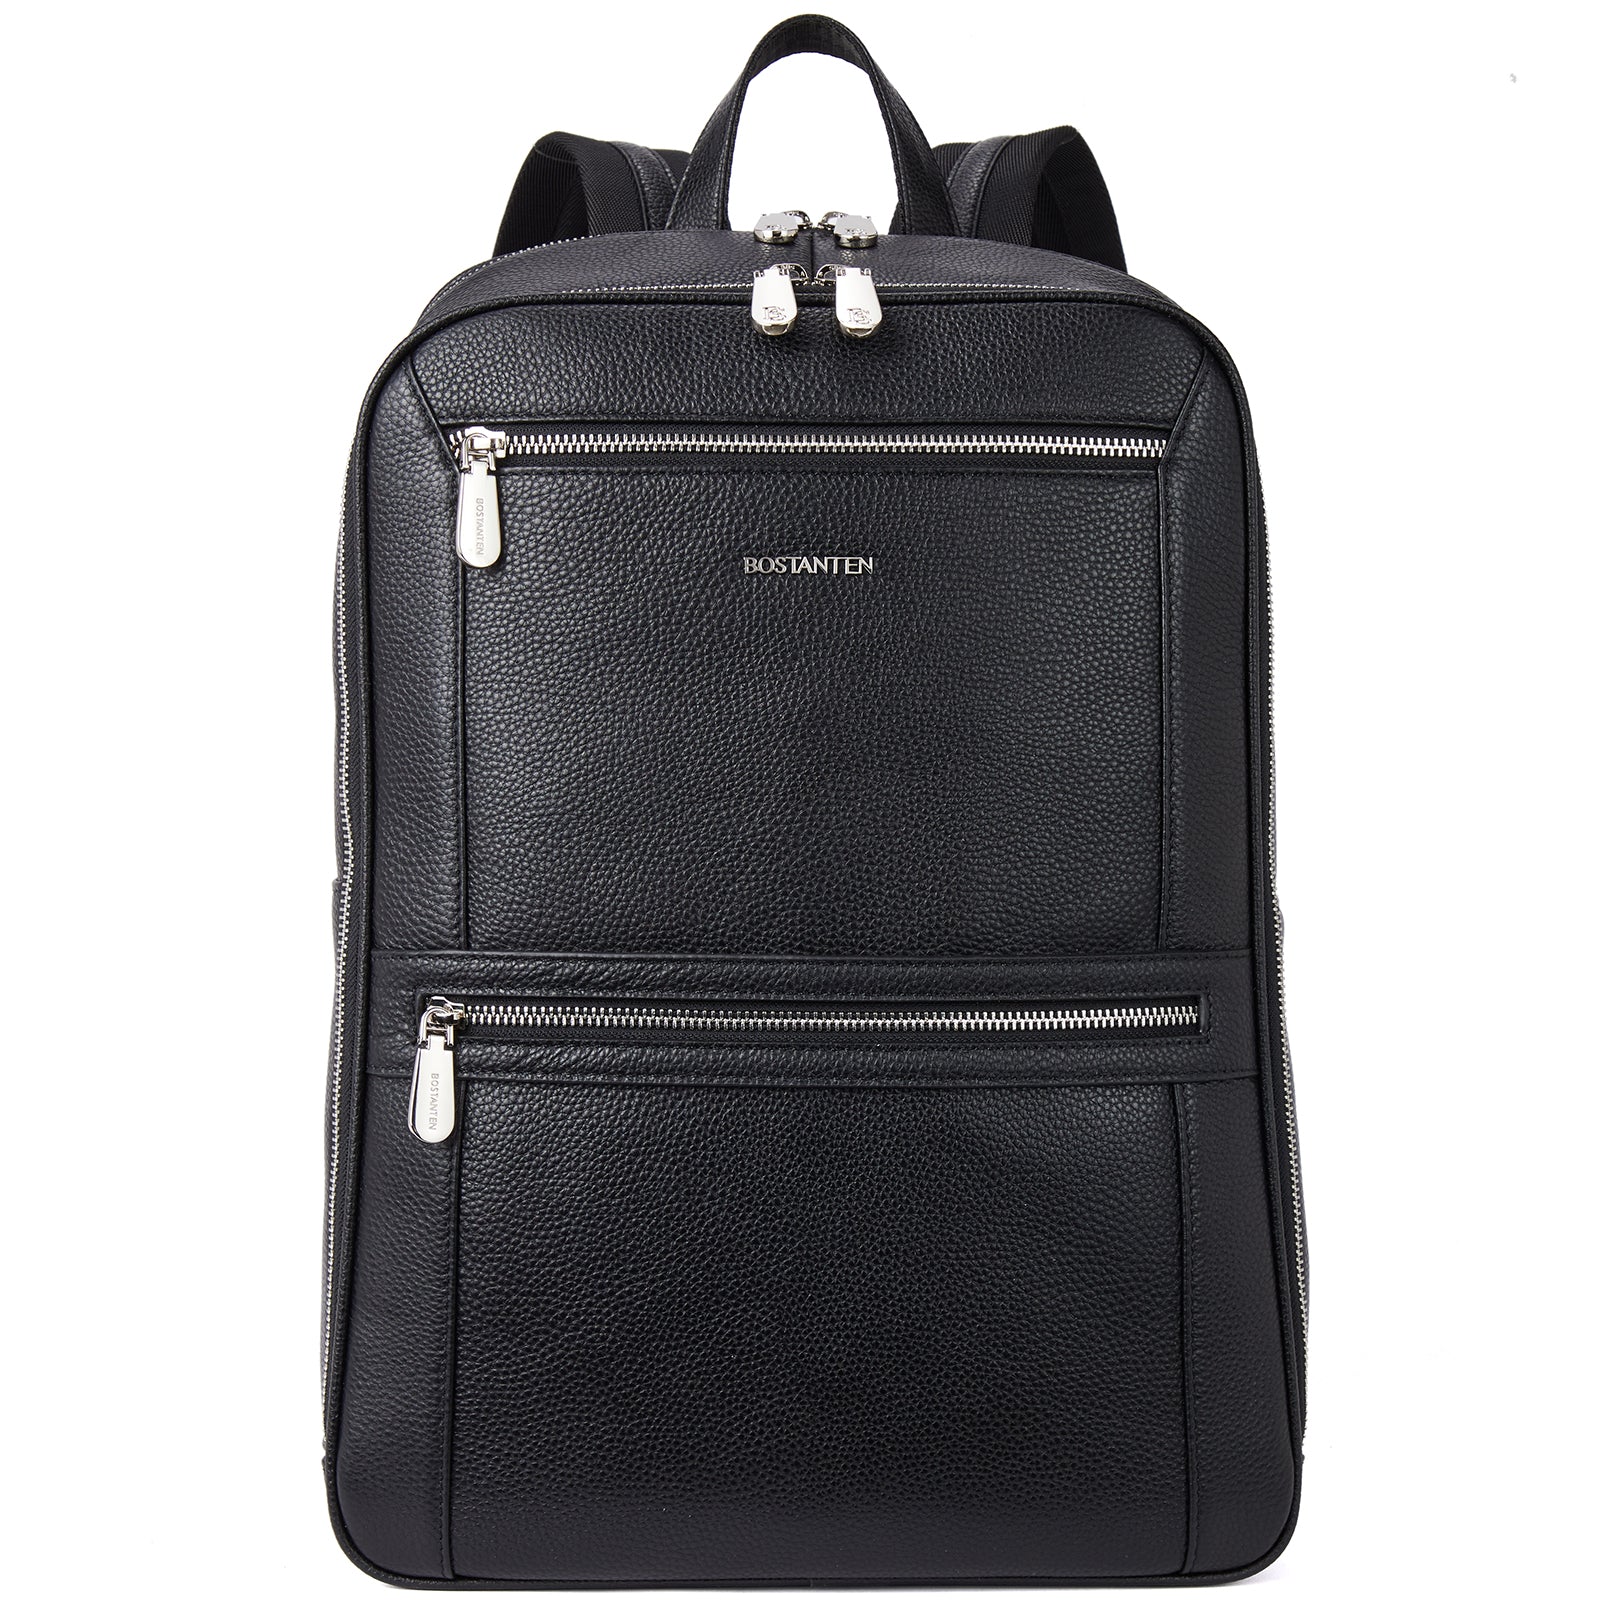 Top Men's Leather Backpack for School and Travel | Bostanten